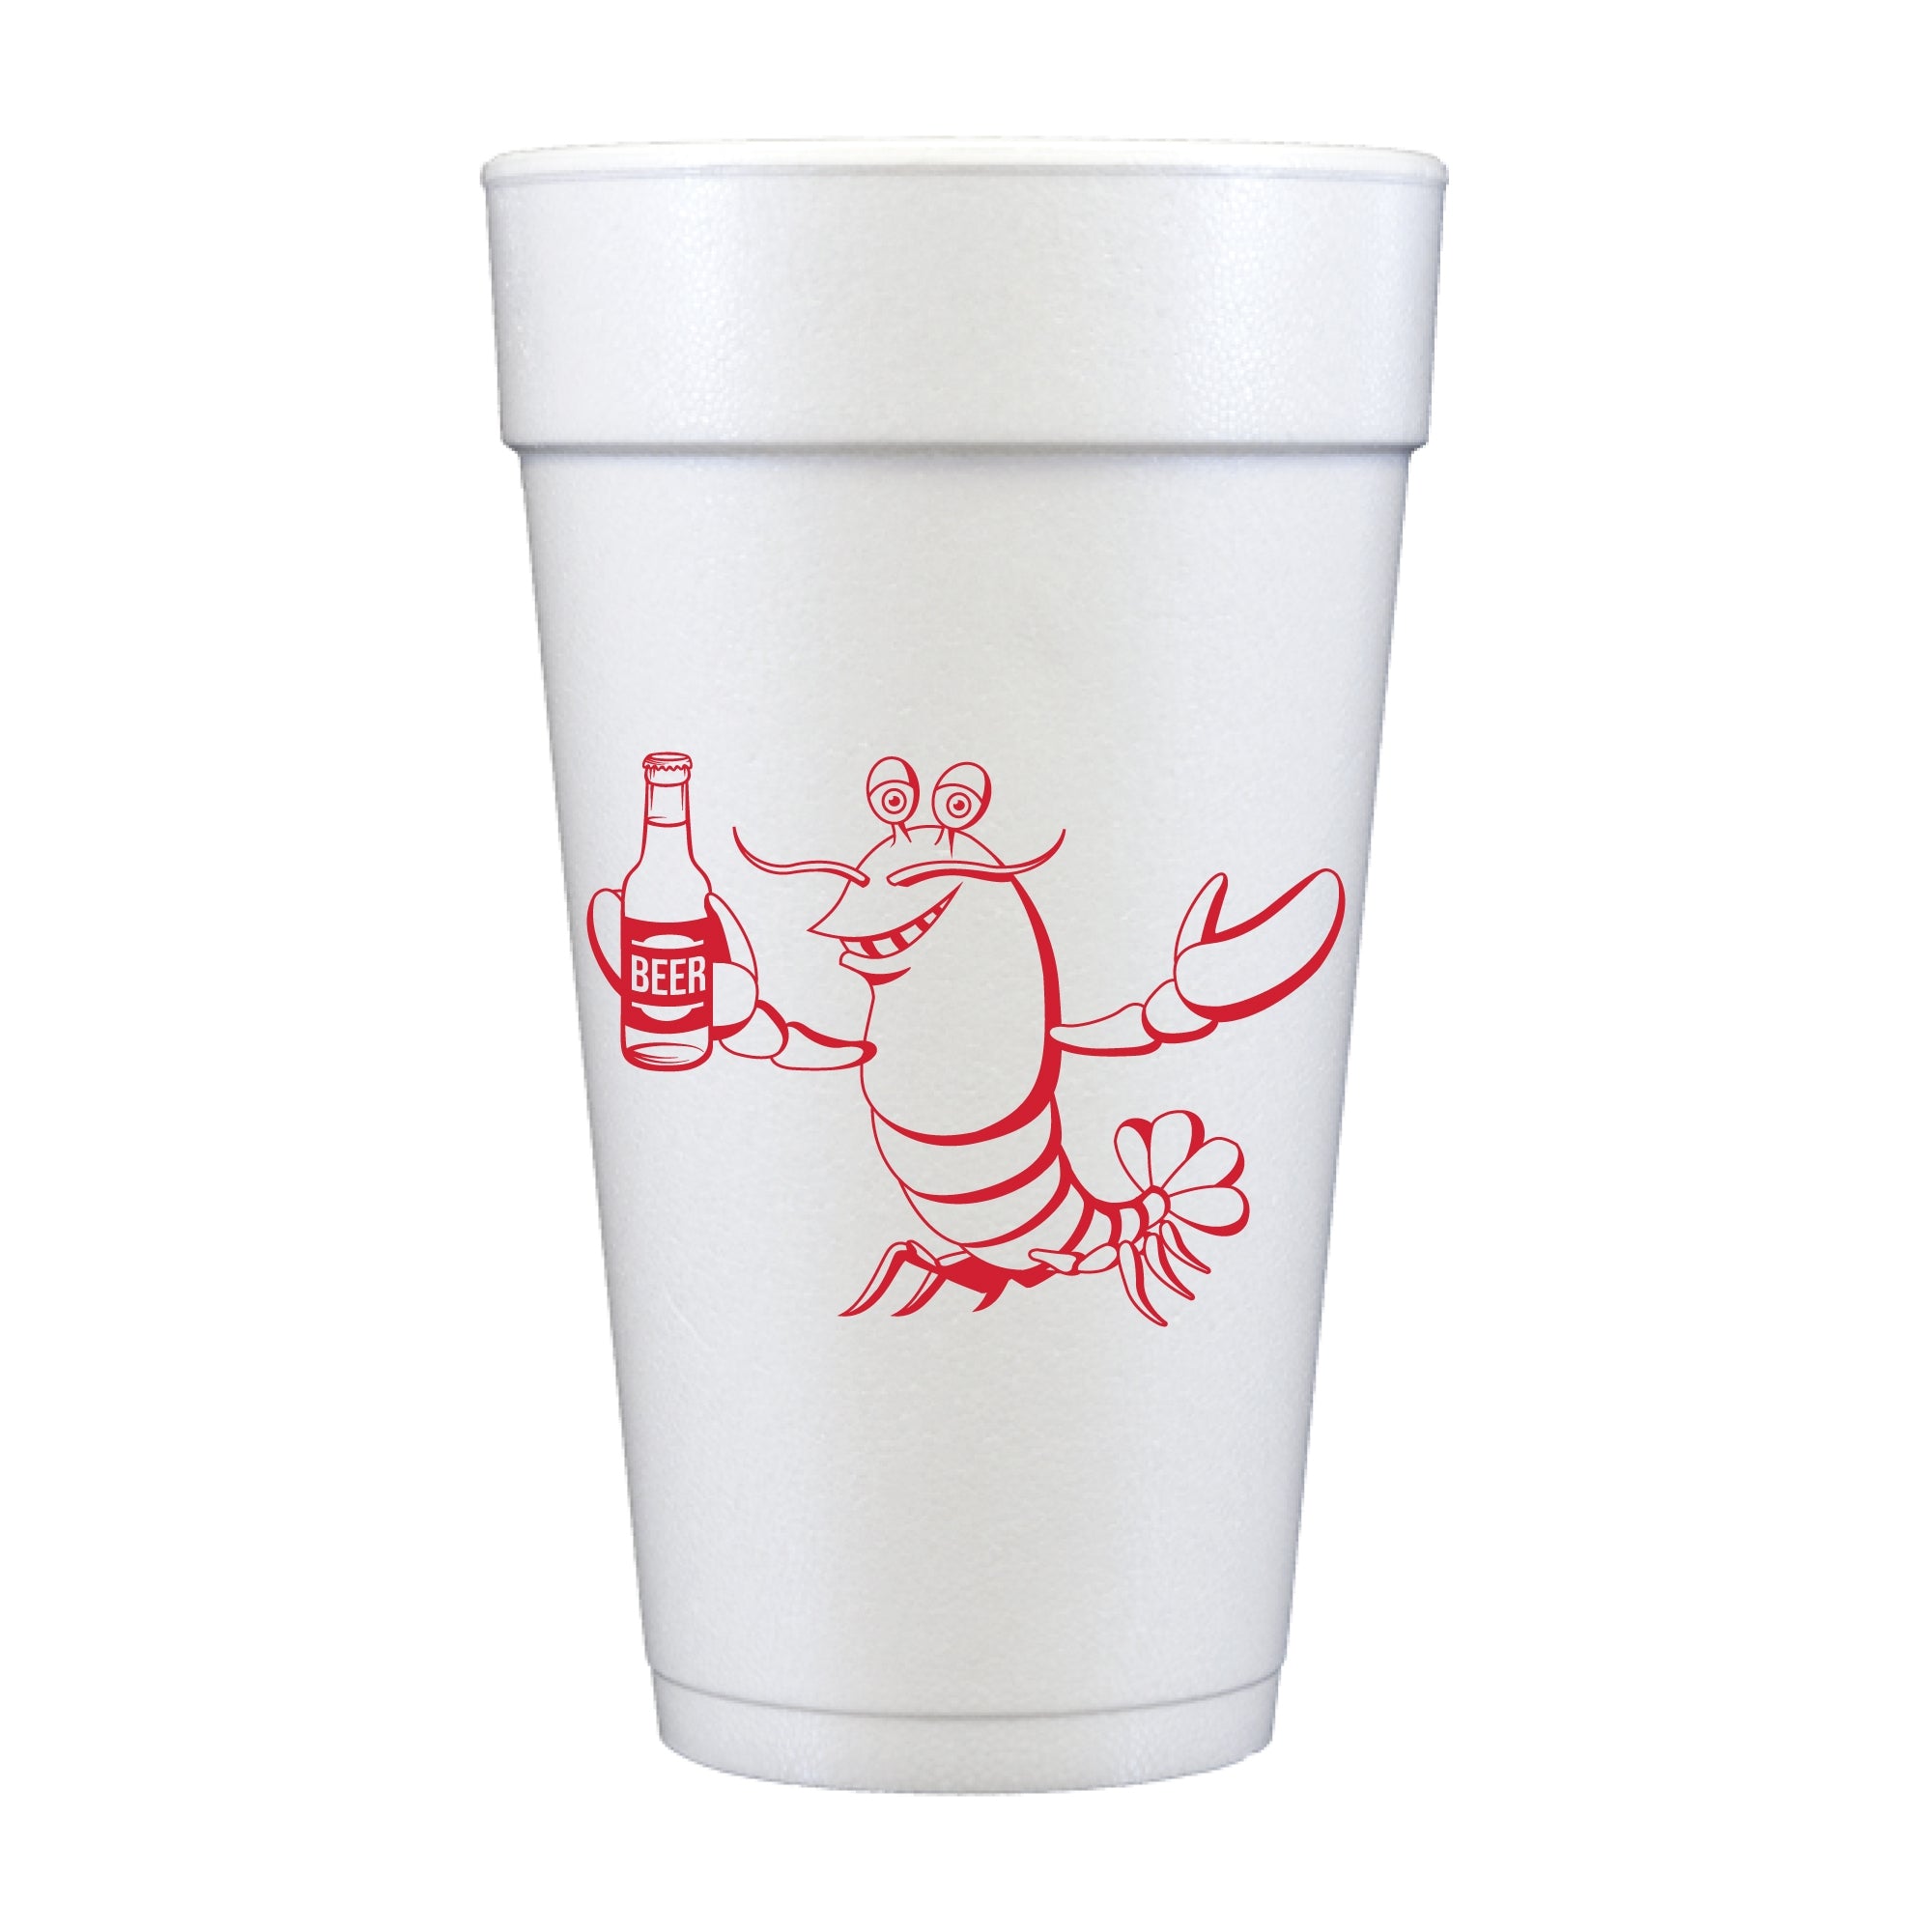 Crawfish and Beer Foam Cups